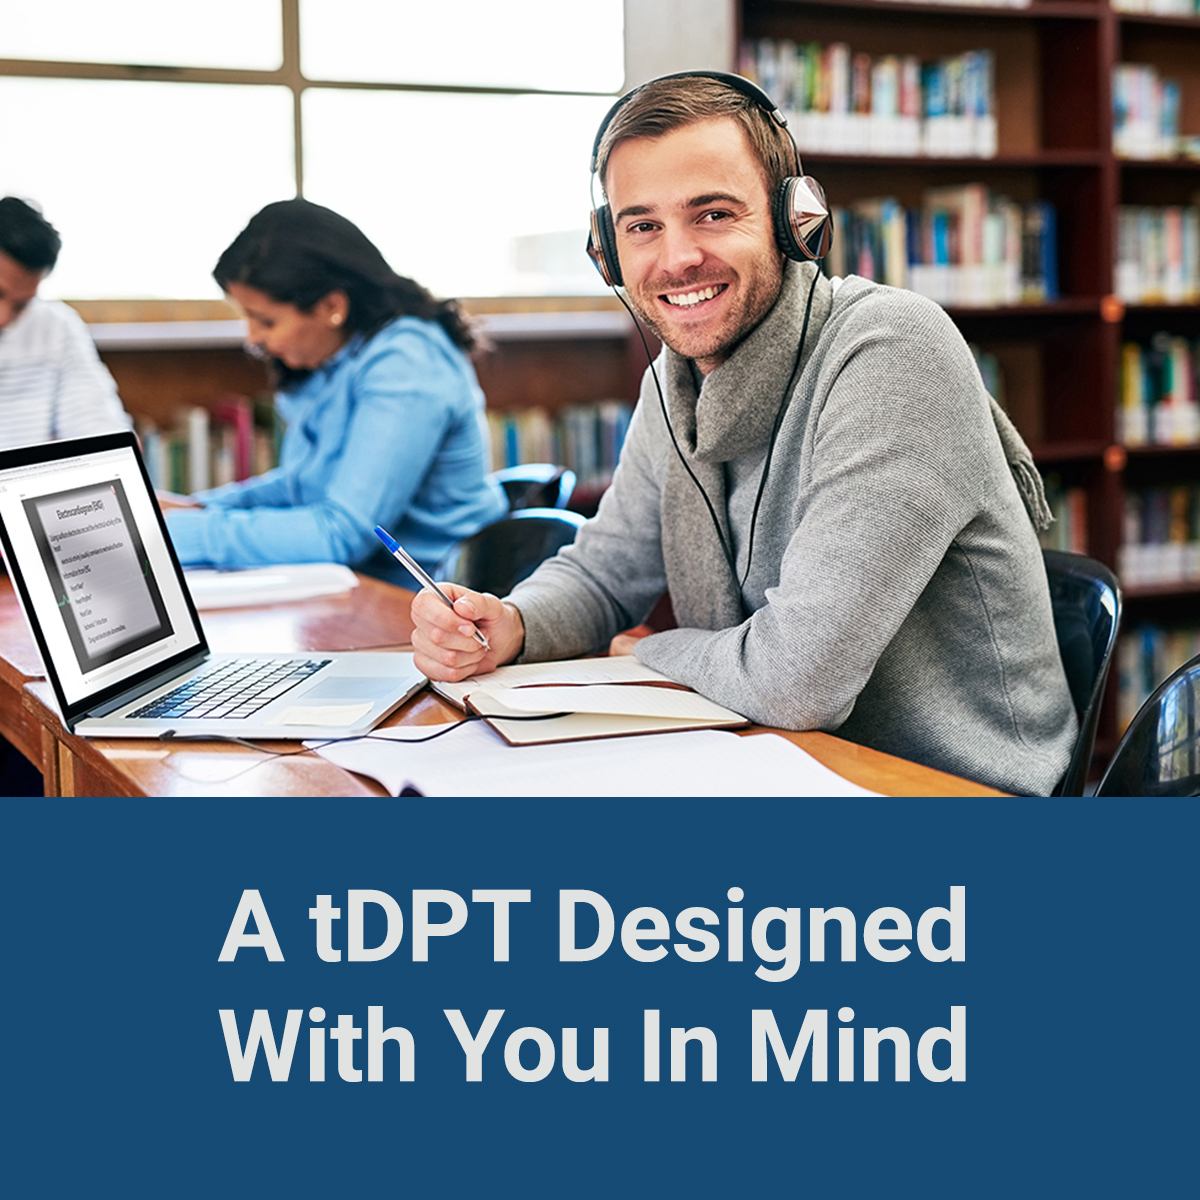 Earn your tDPT online! Summer 2023 applications are now being accepted.

Maintain balance between life, work, and school while you earn a tDPT. You have 24/7 online access, from virtually anywhere with a budget-friendly tuition.  

umt.rehabessentials.com

#MytDPT #PTCareer